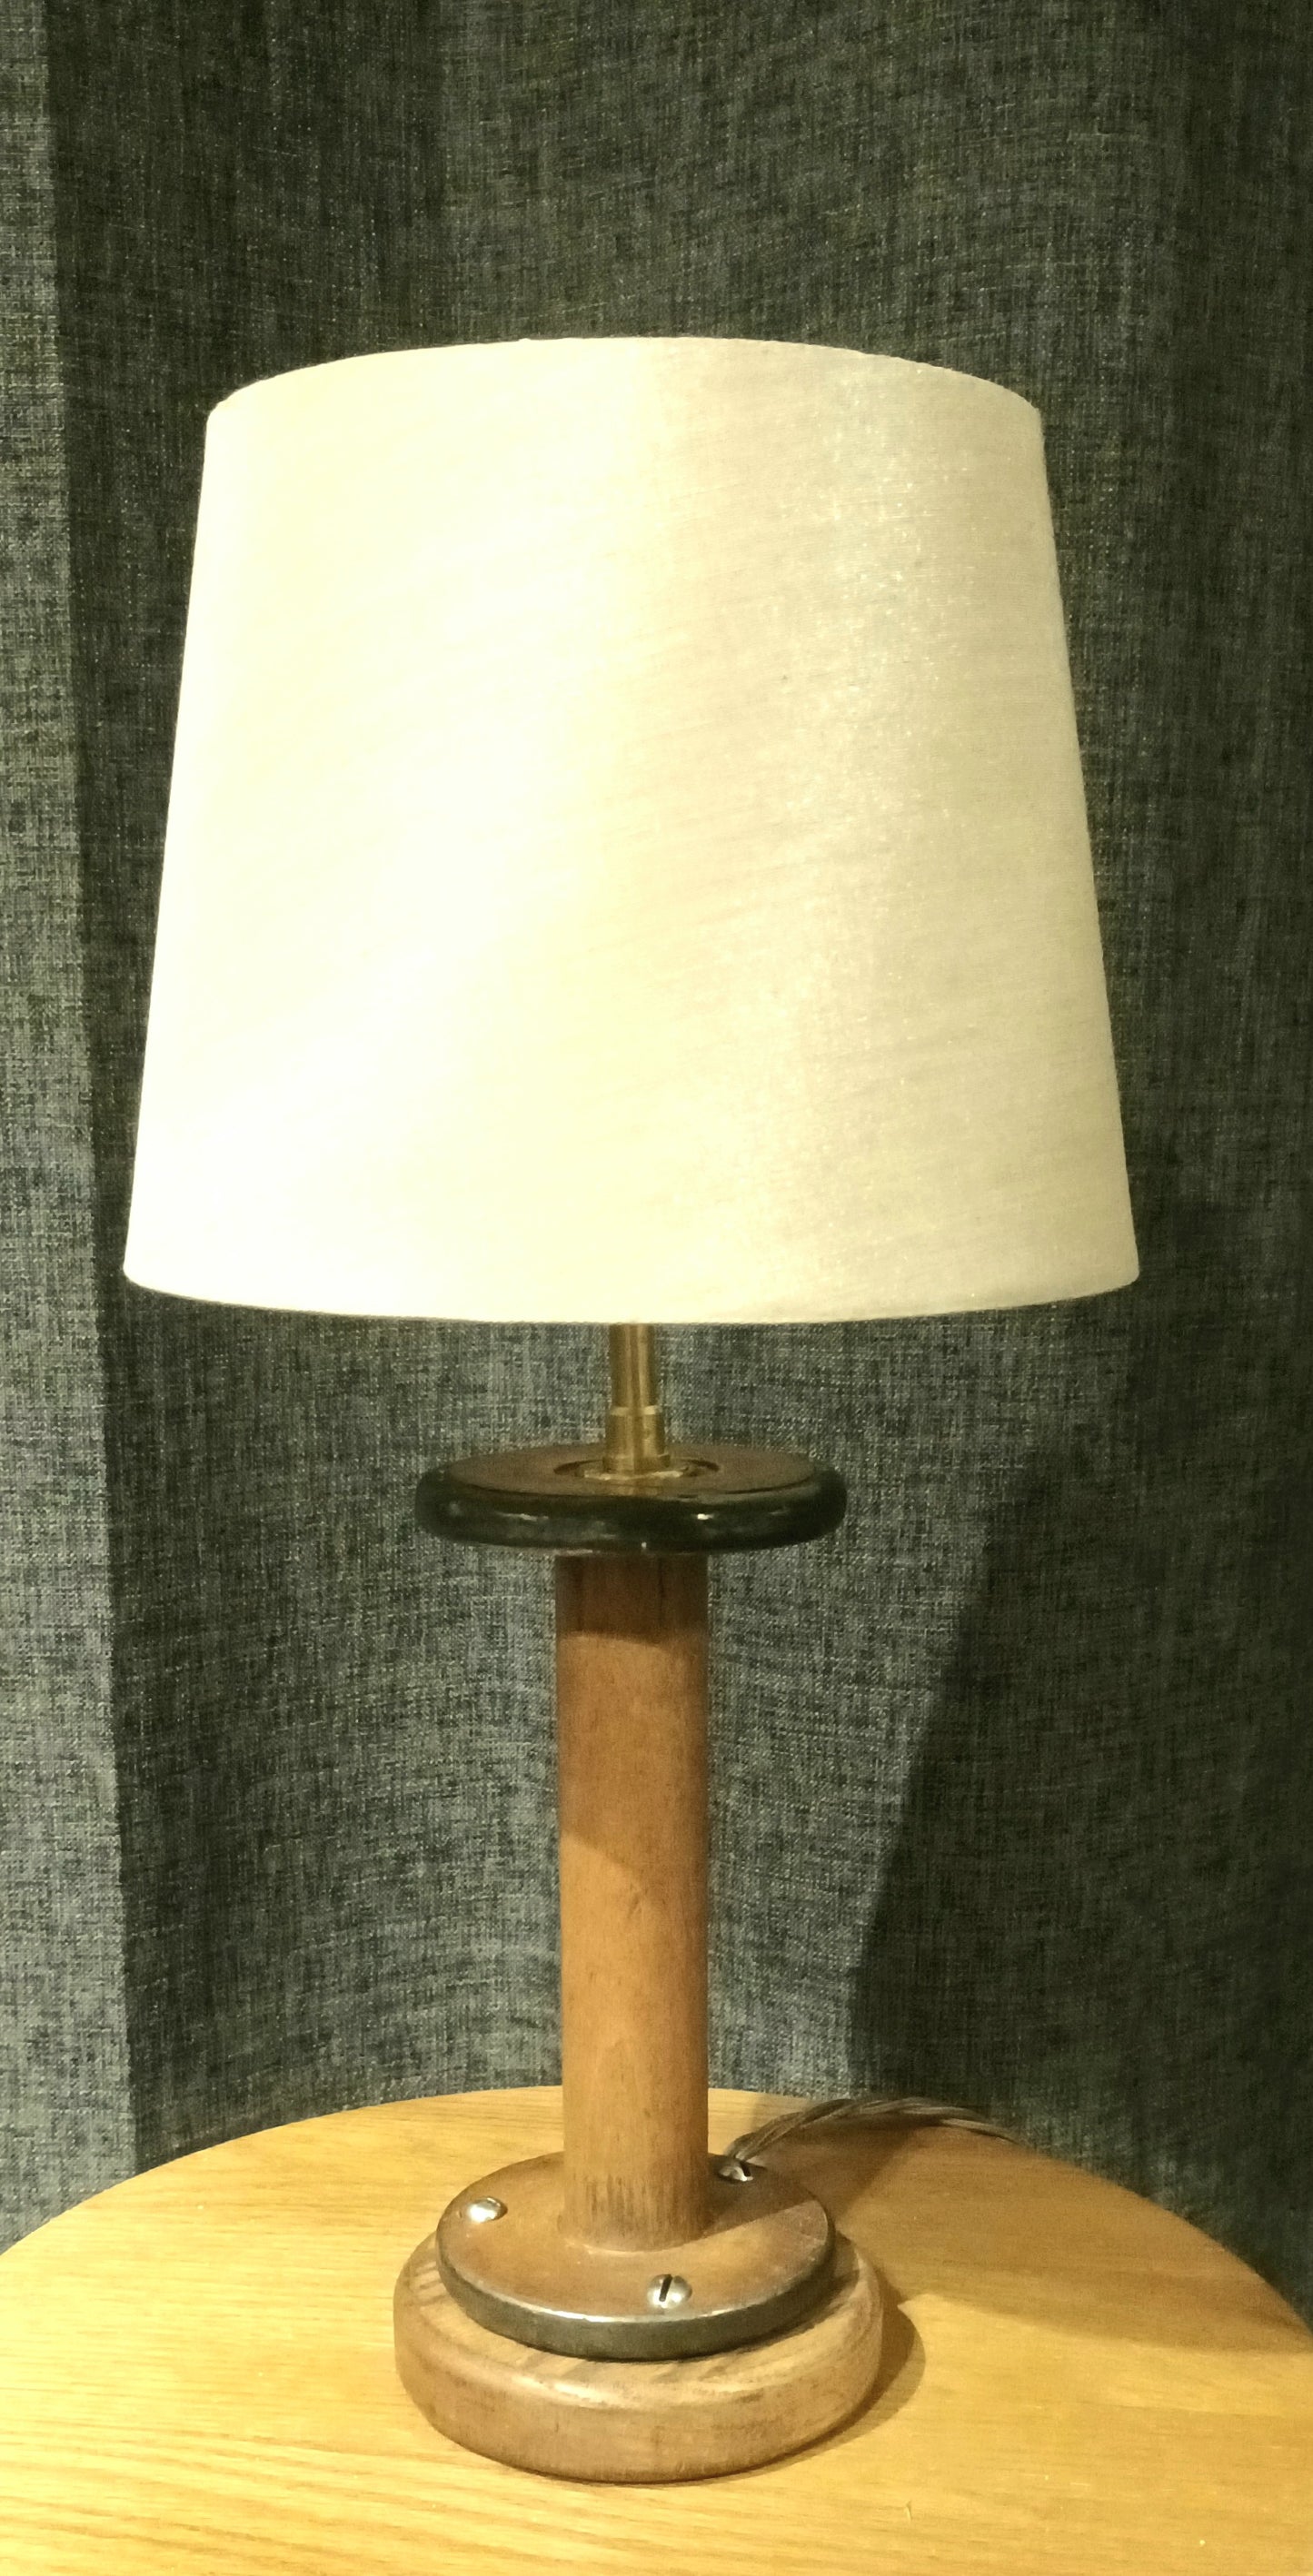 Lamp base's -  constructed using Vintage Industrial Cotton Bobbins